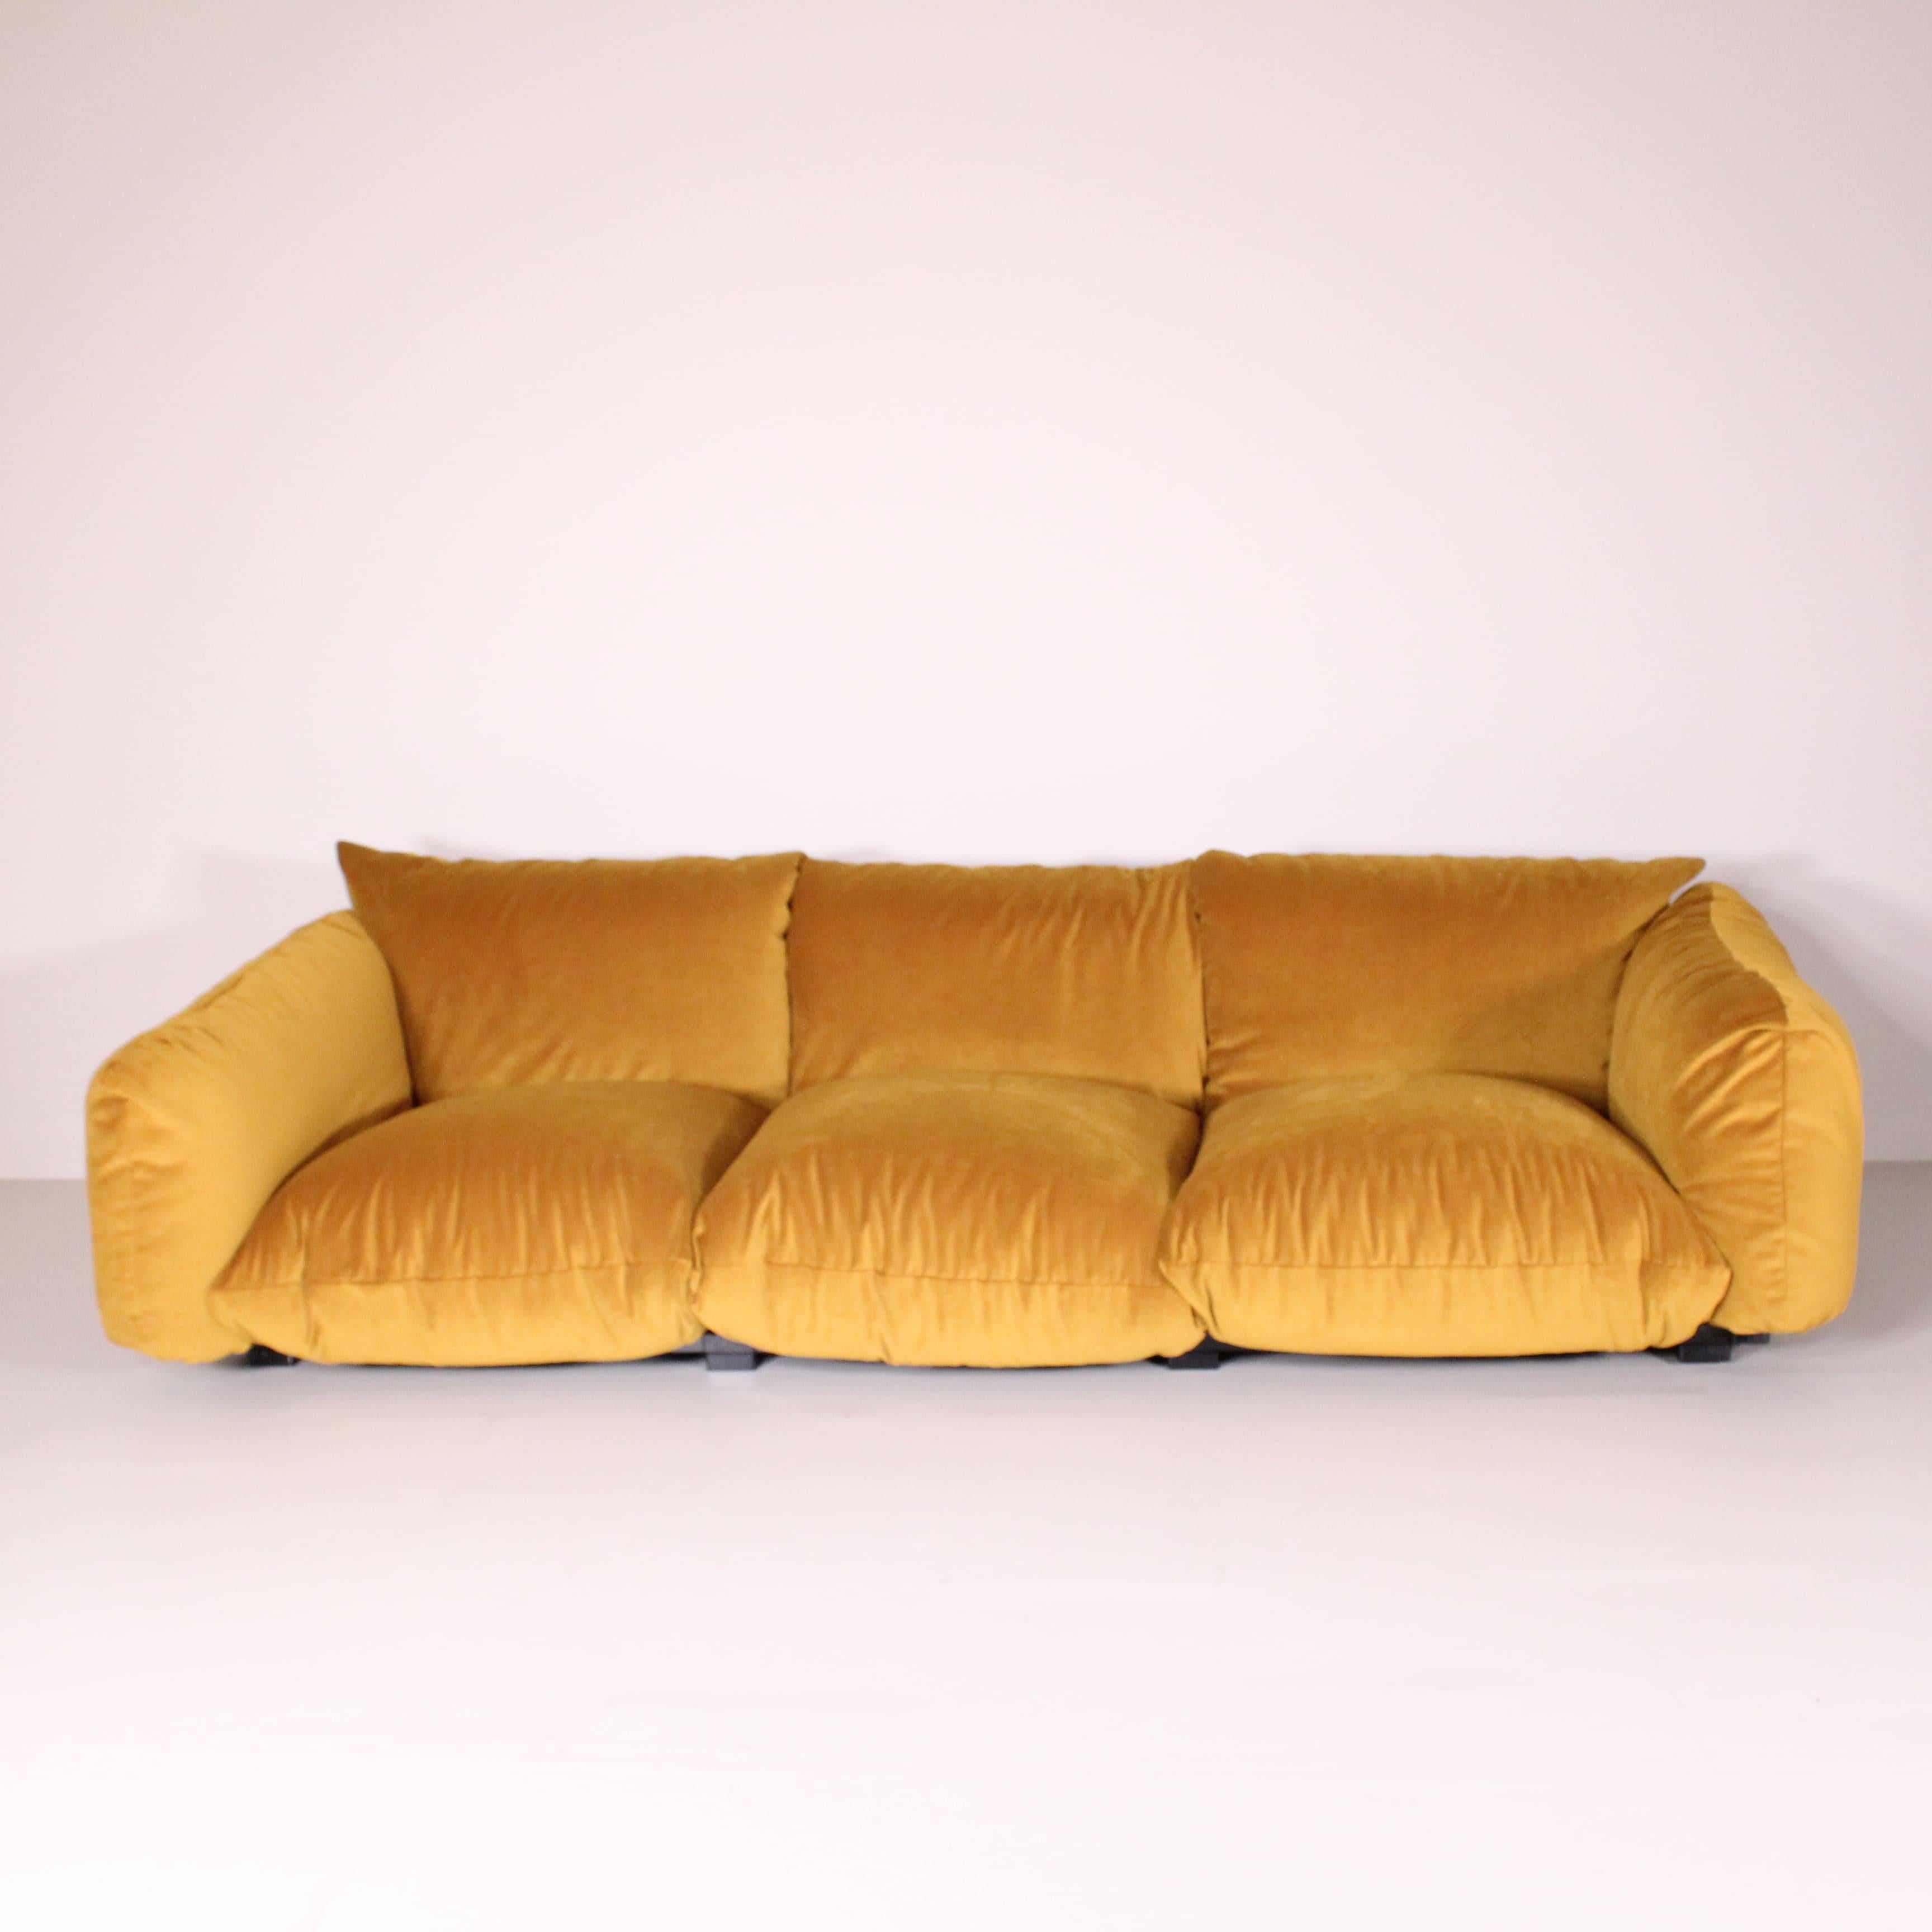 Marenco sofa and 2 armchairs set, Mario Marenco for Arflex, 1970 For Sale 2